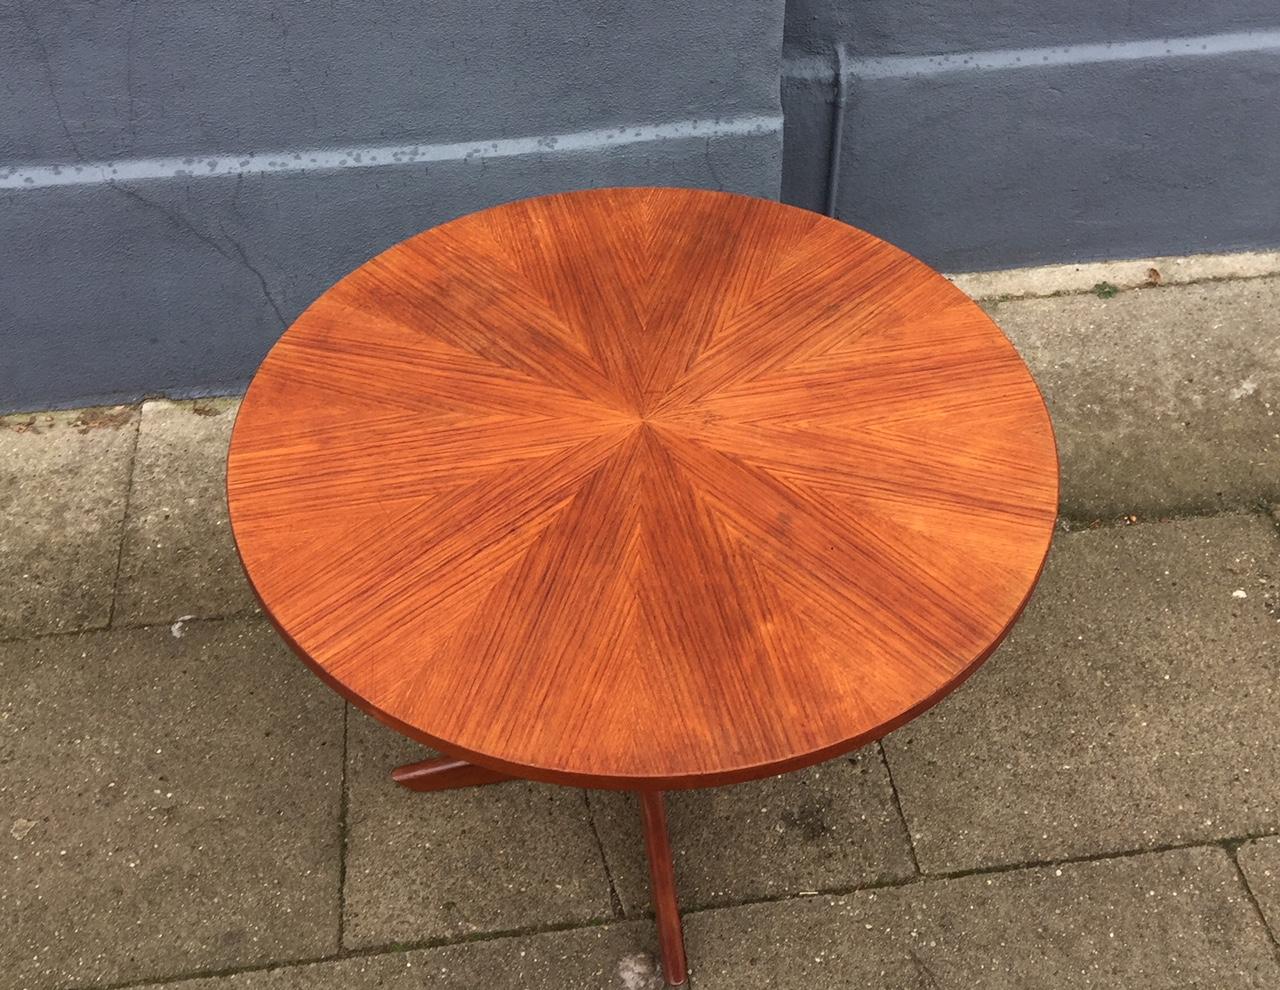 This midcentury Danish teak coffee table comes with sculptural solid teak legs and intricate veneer work in the shape of a bursting star on the tabletop. It is commonly referred to as the Starburst coffee table. It was designed by Holger Georg